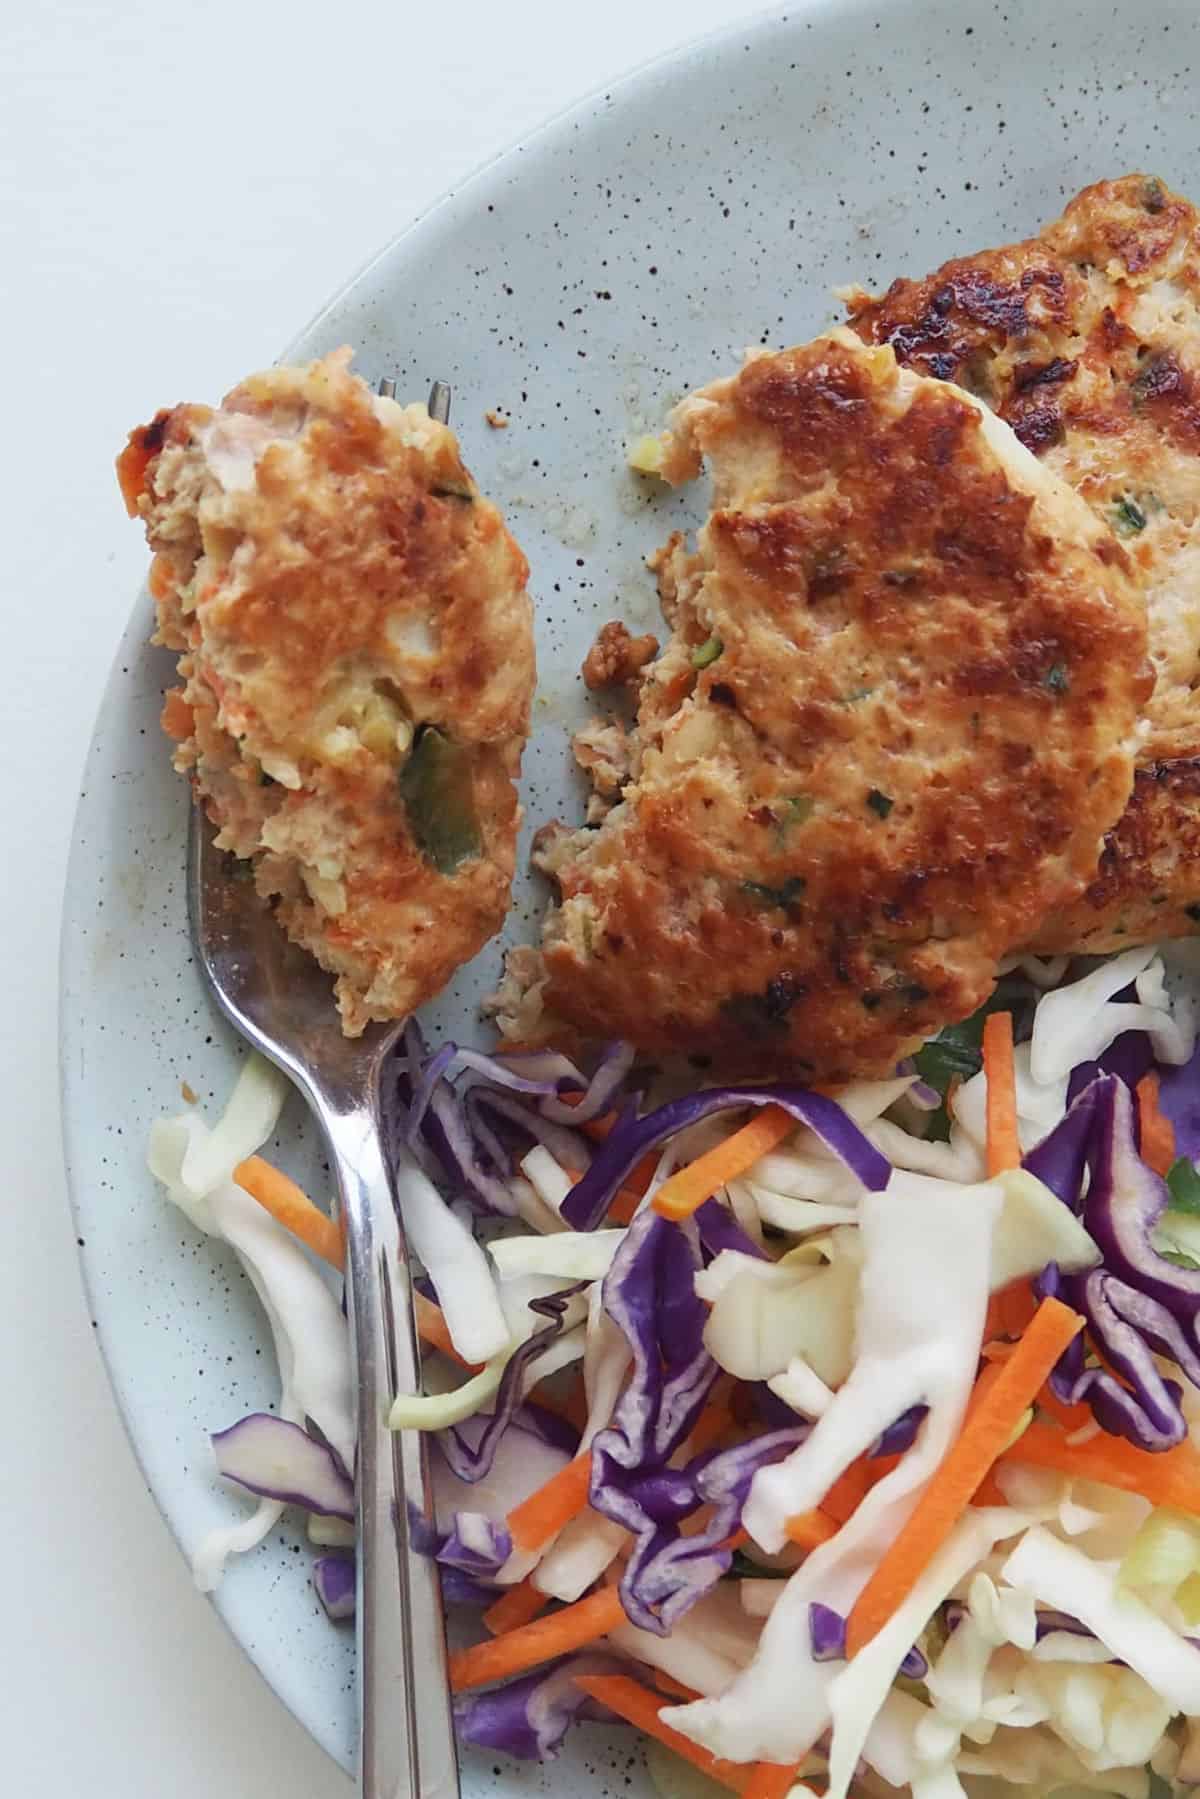 Chicken rissole cut in half on a green plate with coleslaw.